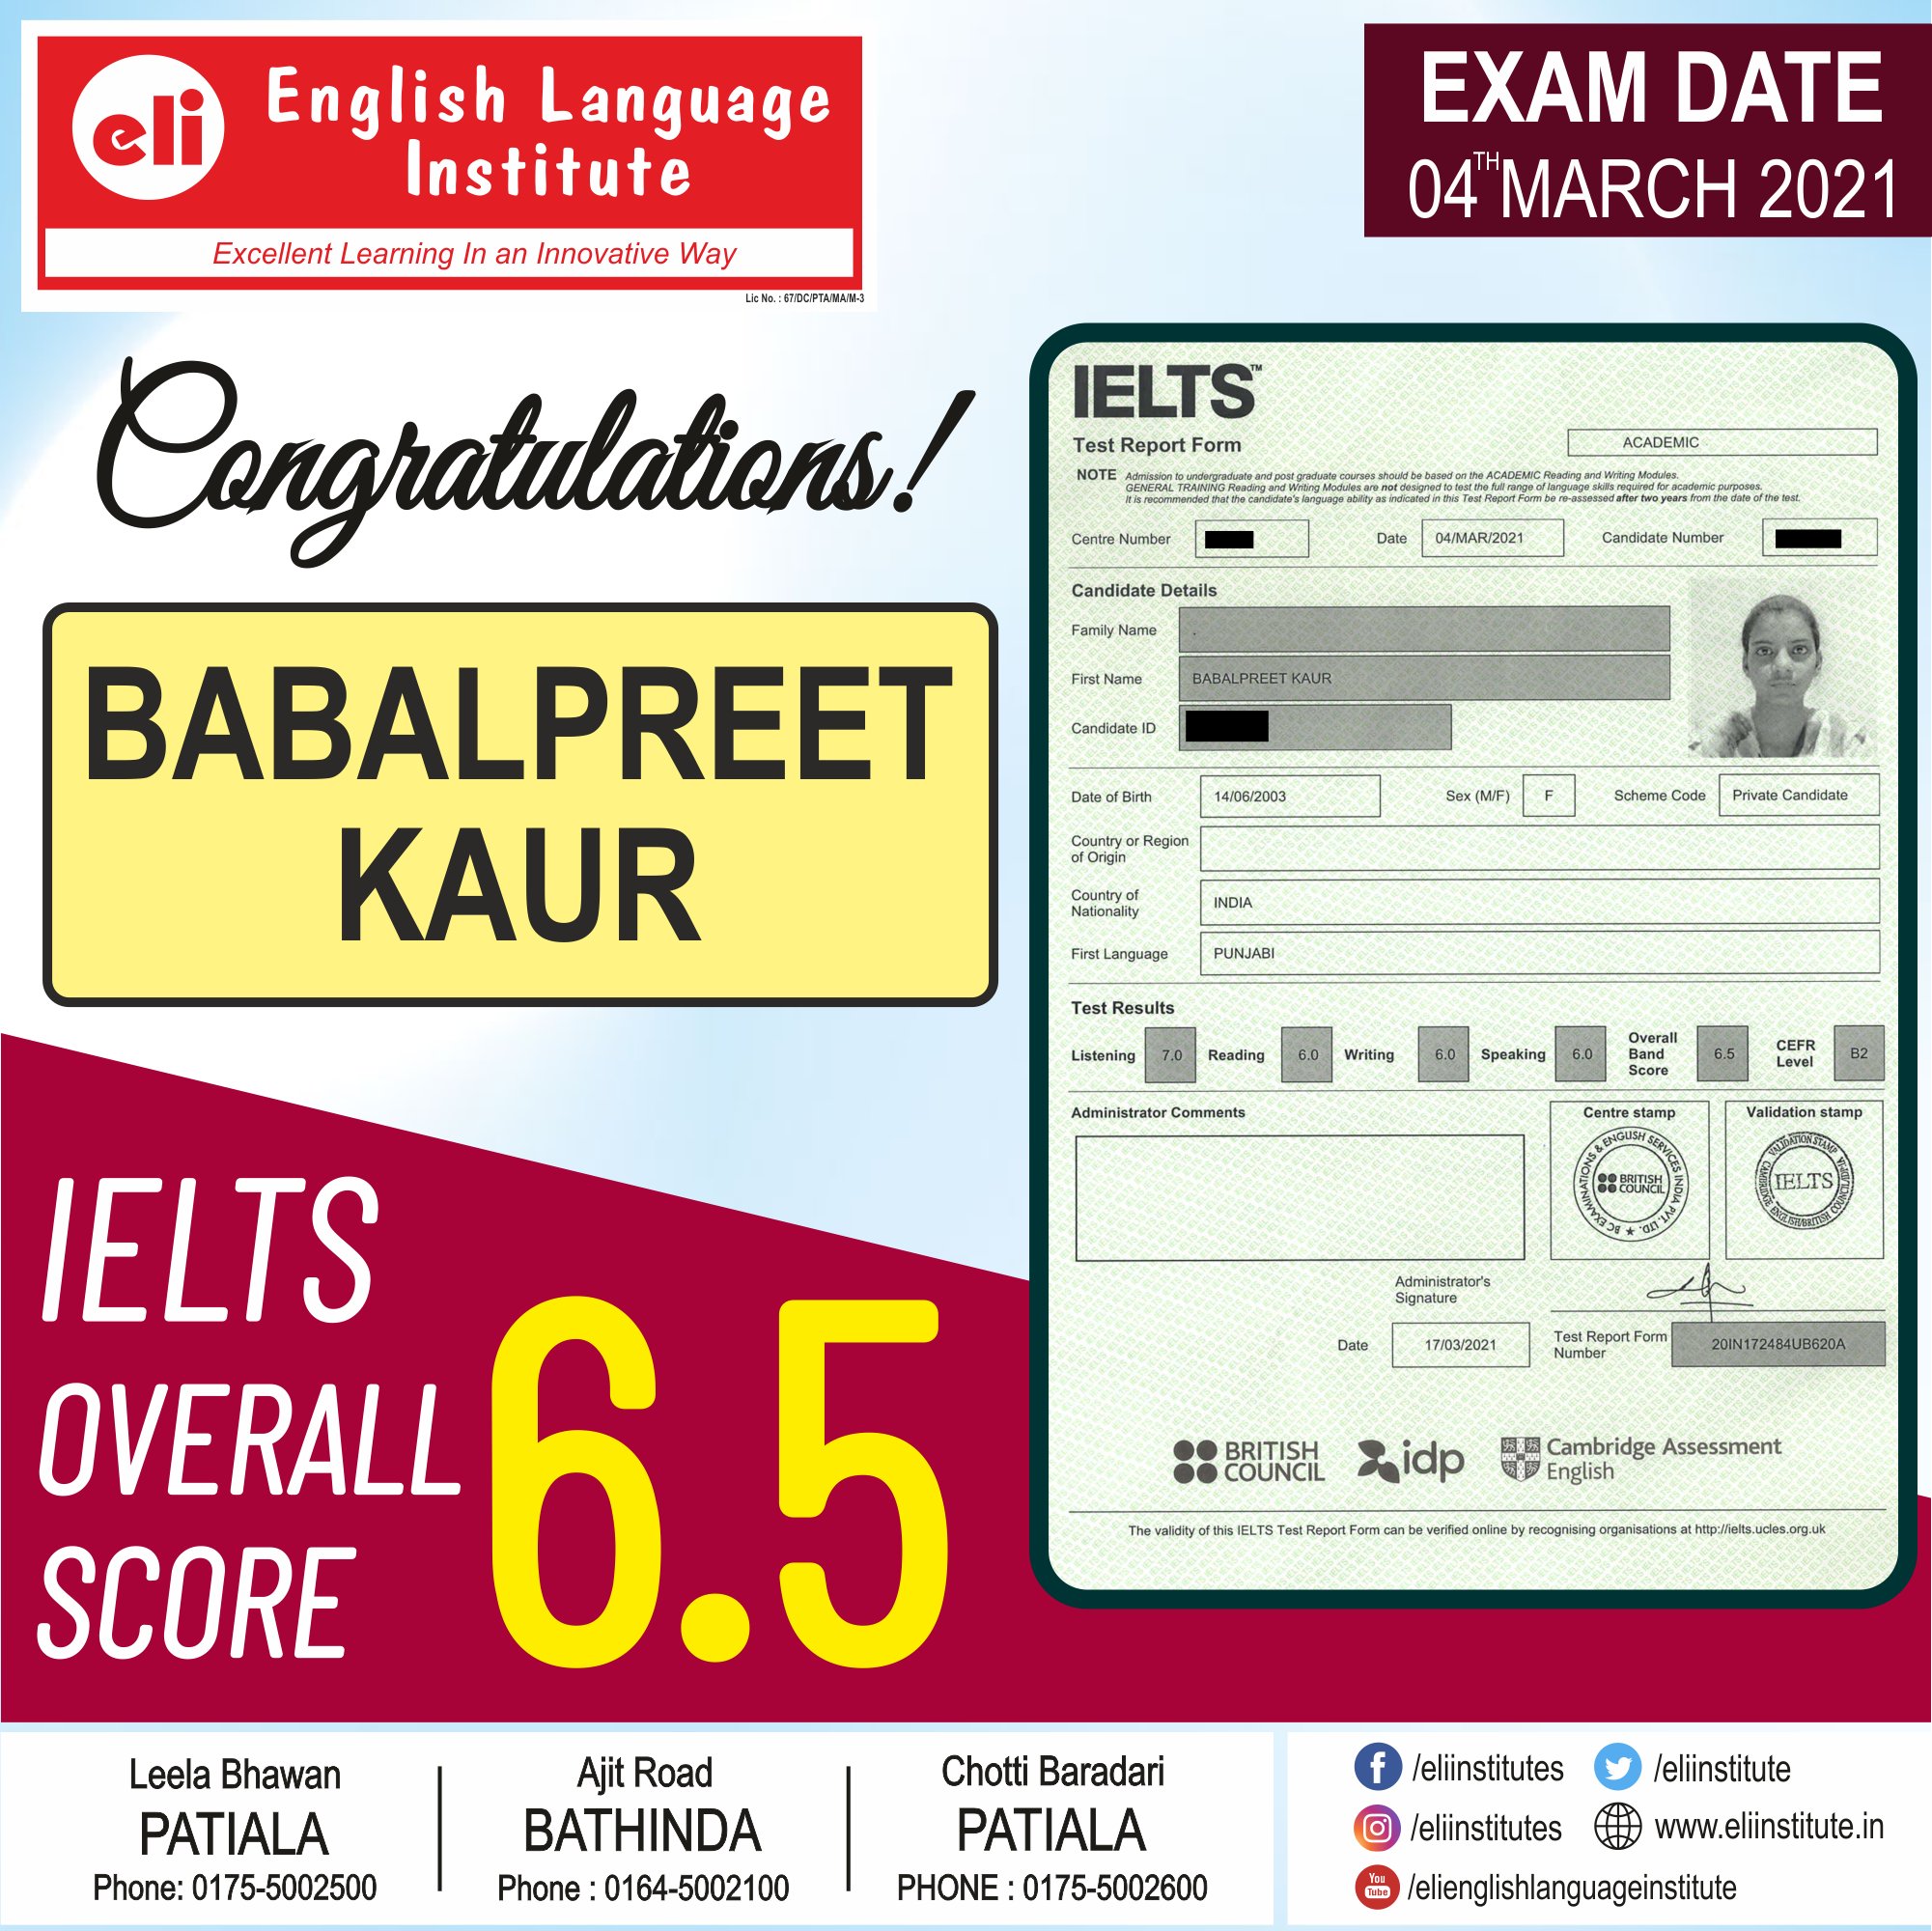 English Language Institute (Eli) on Twitter:  "💥𝐂𝐨𝐧𝐠𝐫𝐚𝐭𝐮𝐥𝐚𝐭𝐢𝐨𝐧𝐬!💥 Babalpreet Kaur for scoring overall 6.5  in IELTS examination. Best of Luck for Bright Future.🏆 Registration Open  for new IELTS batches. Register Today! Contact: ☎